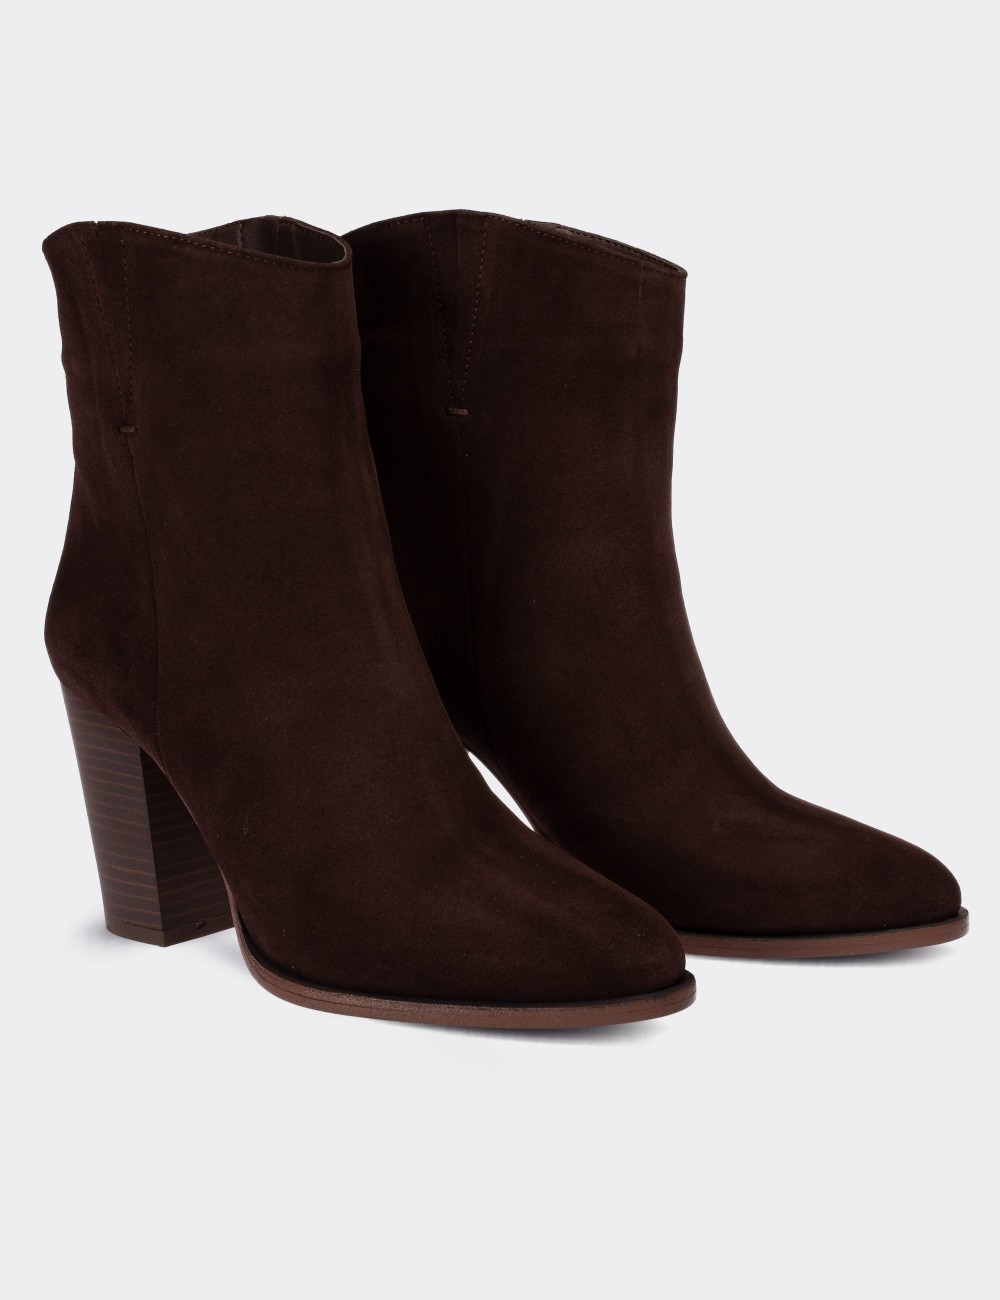 Brown Suede Leather Boots - E4452ZKHVC02